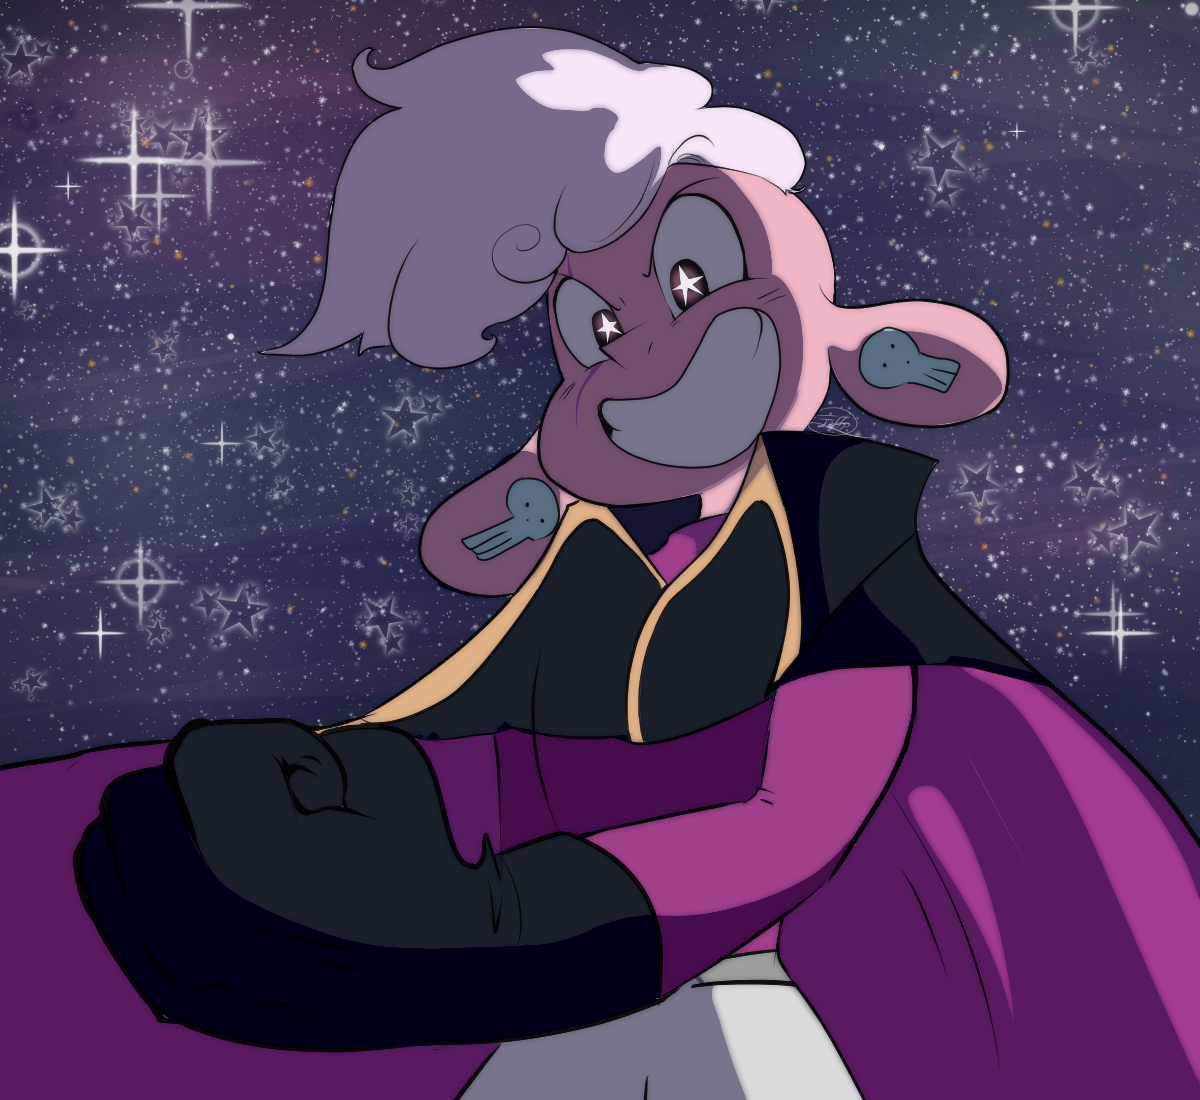 “We’re almost there Off colors! To my home world!” I had been meaning to get around to drawing lars for a while now but just kind of never did. However I was requested by @importanttriumphphilosopher...